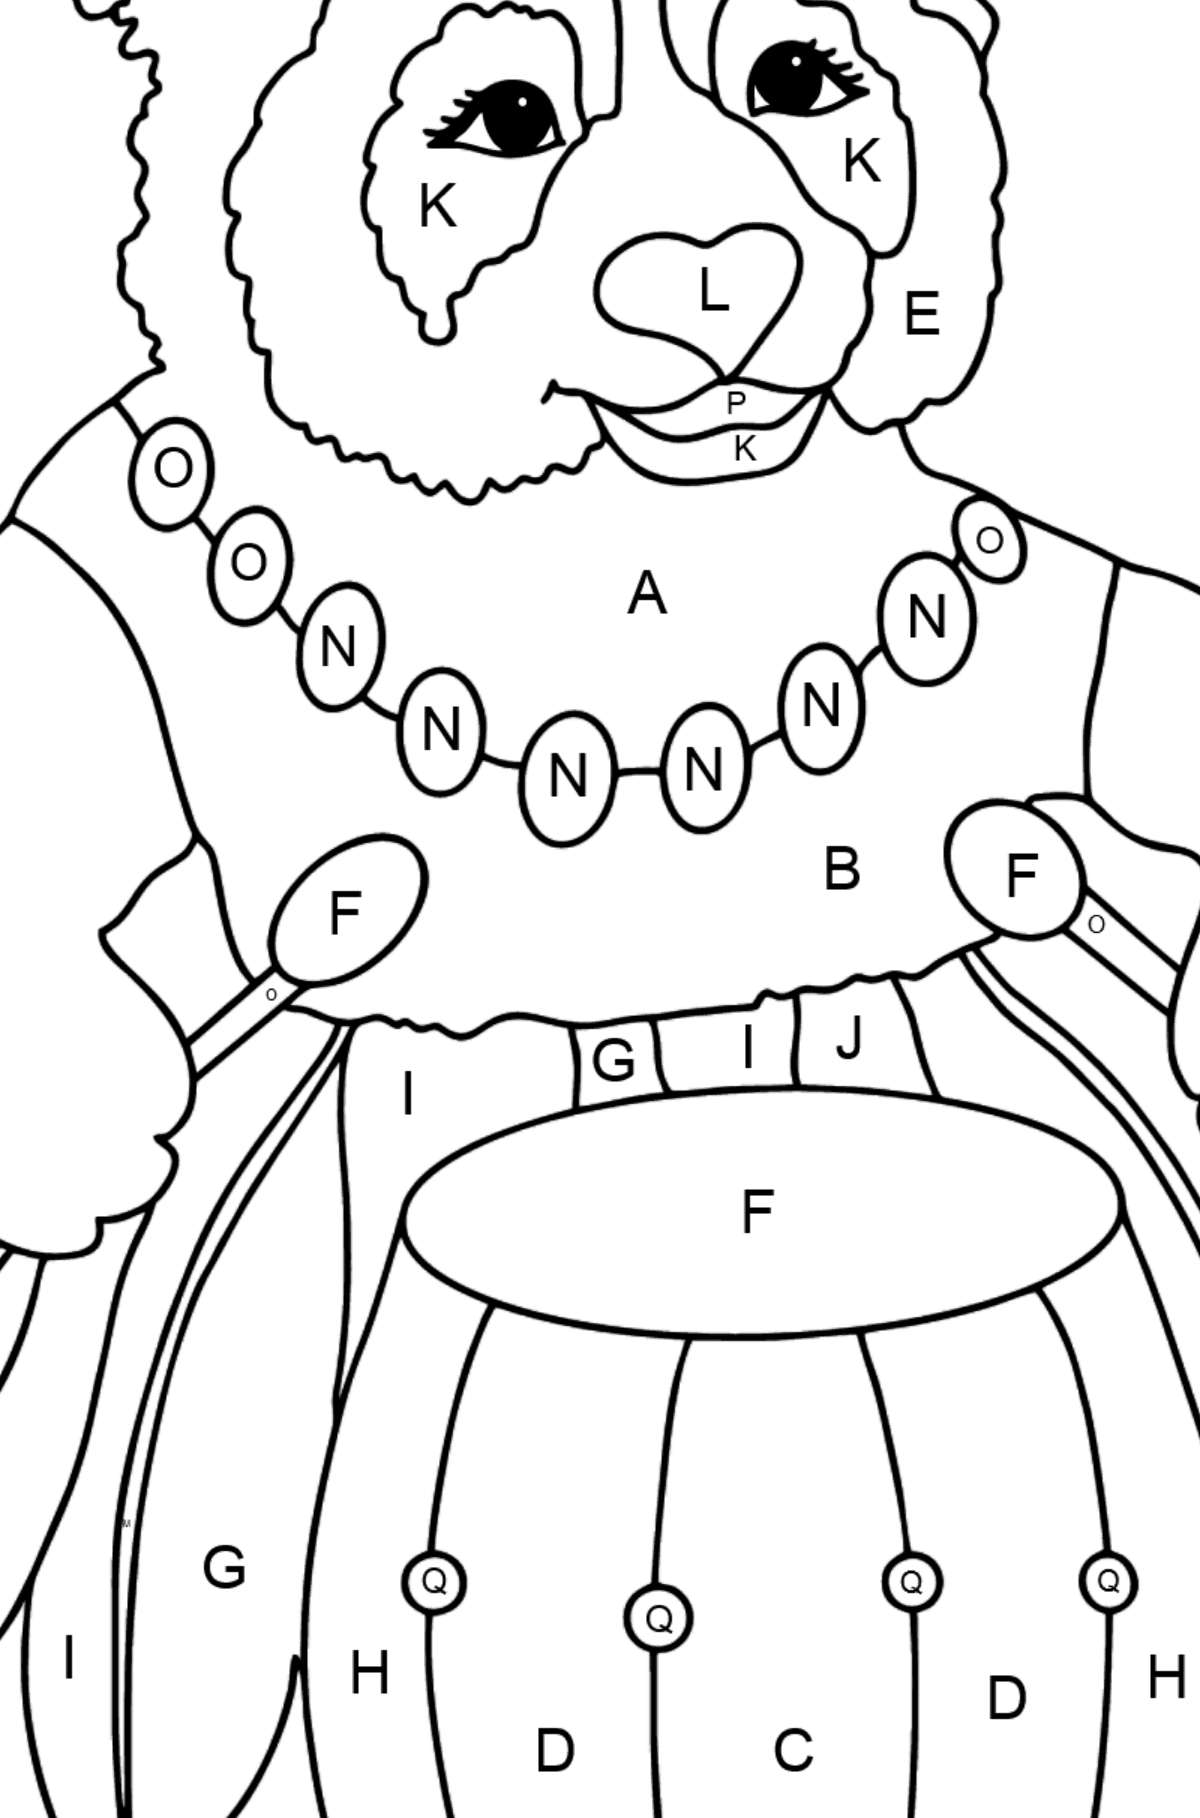 Panda For Kids (Hard) coloring page - Coloring by Letters for Kids